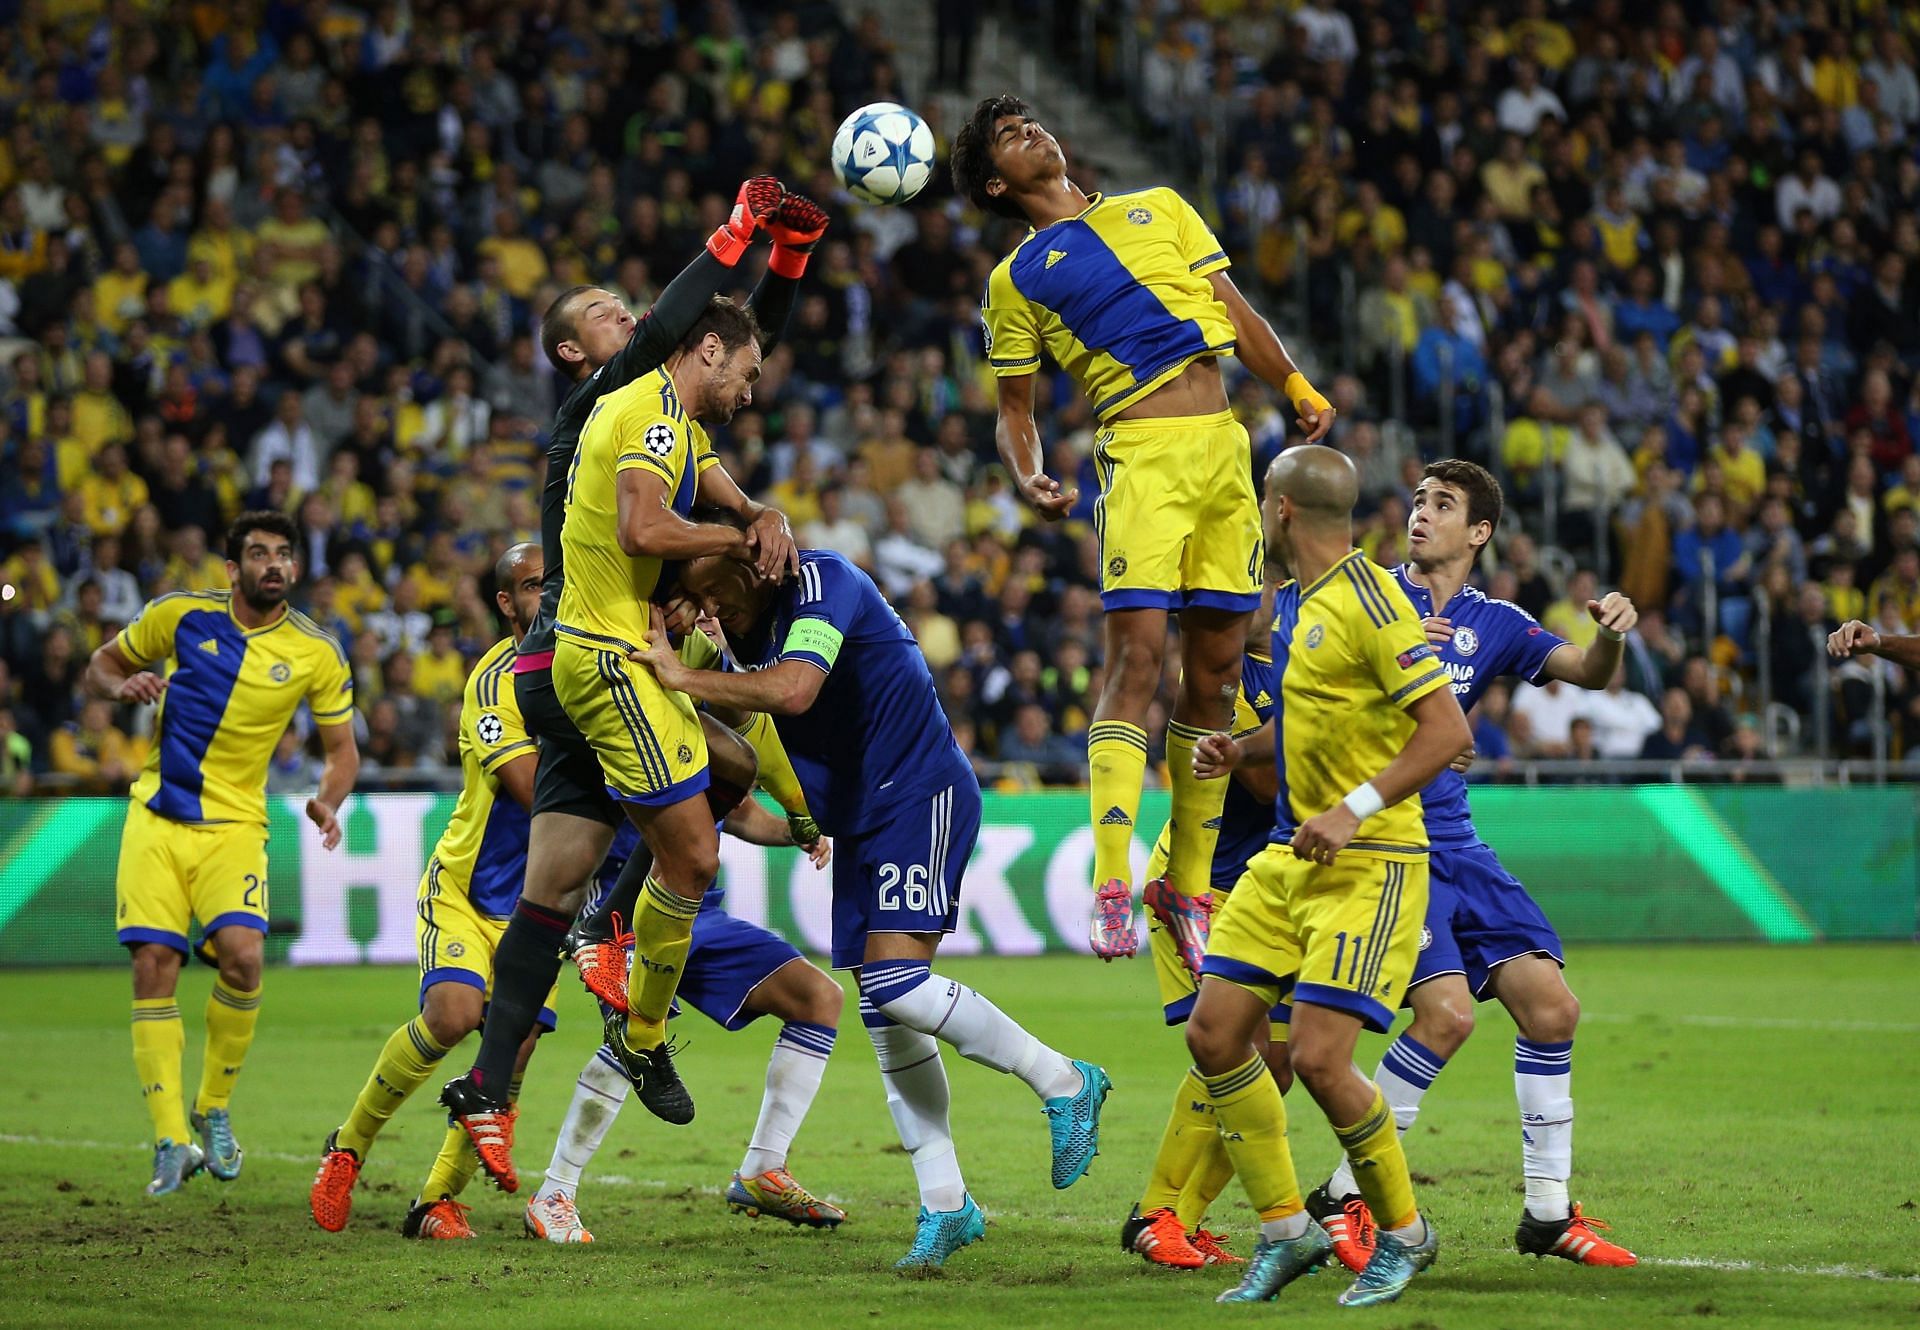 Maccabi Tel-Aviv are looking to make consecutive appearances in the Europa Conference League.